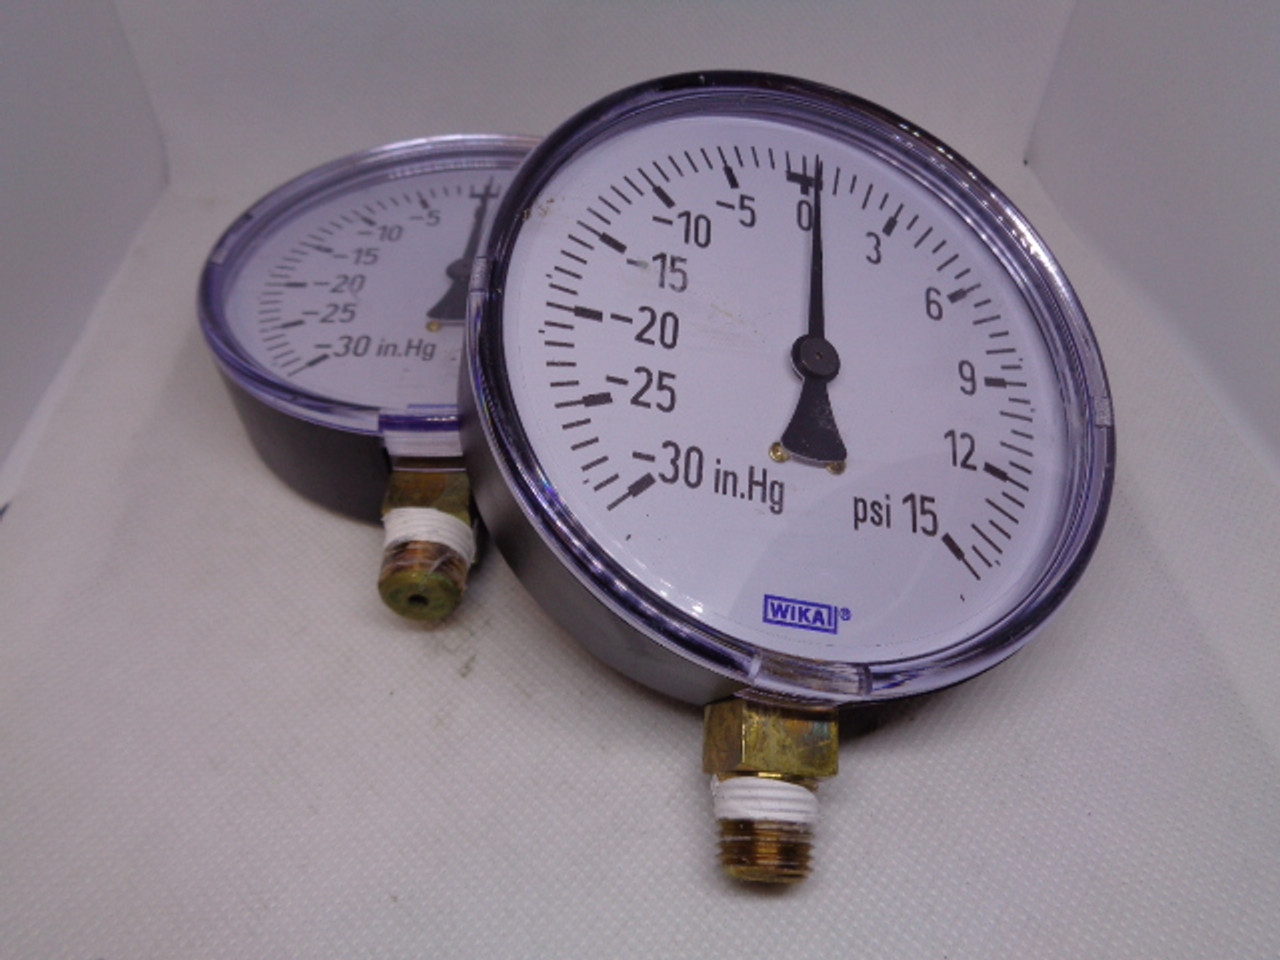 (2) Wika -30 in.Hg - 15 psi Pressure Gages